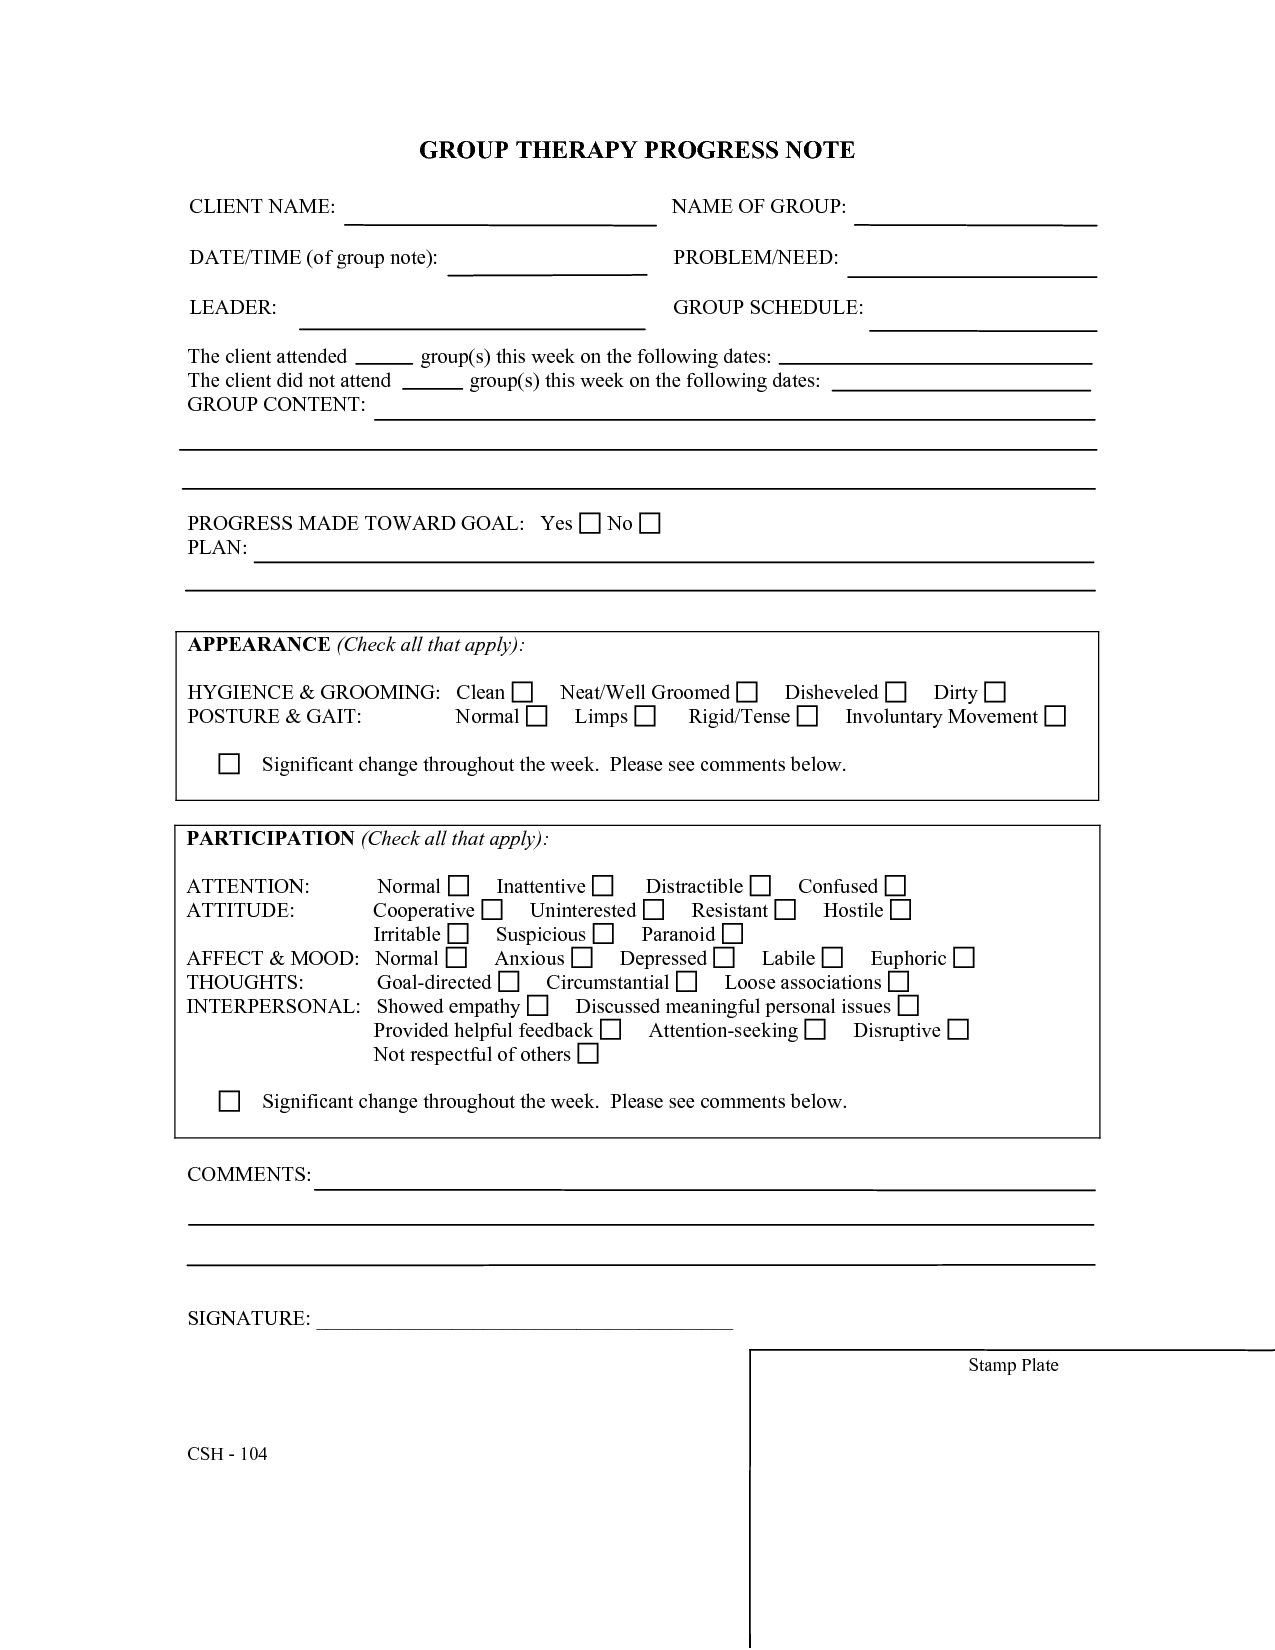 Therapy Progress Note Template | Counseling: DAP Notes | Pinterest 